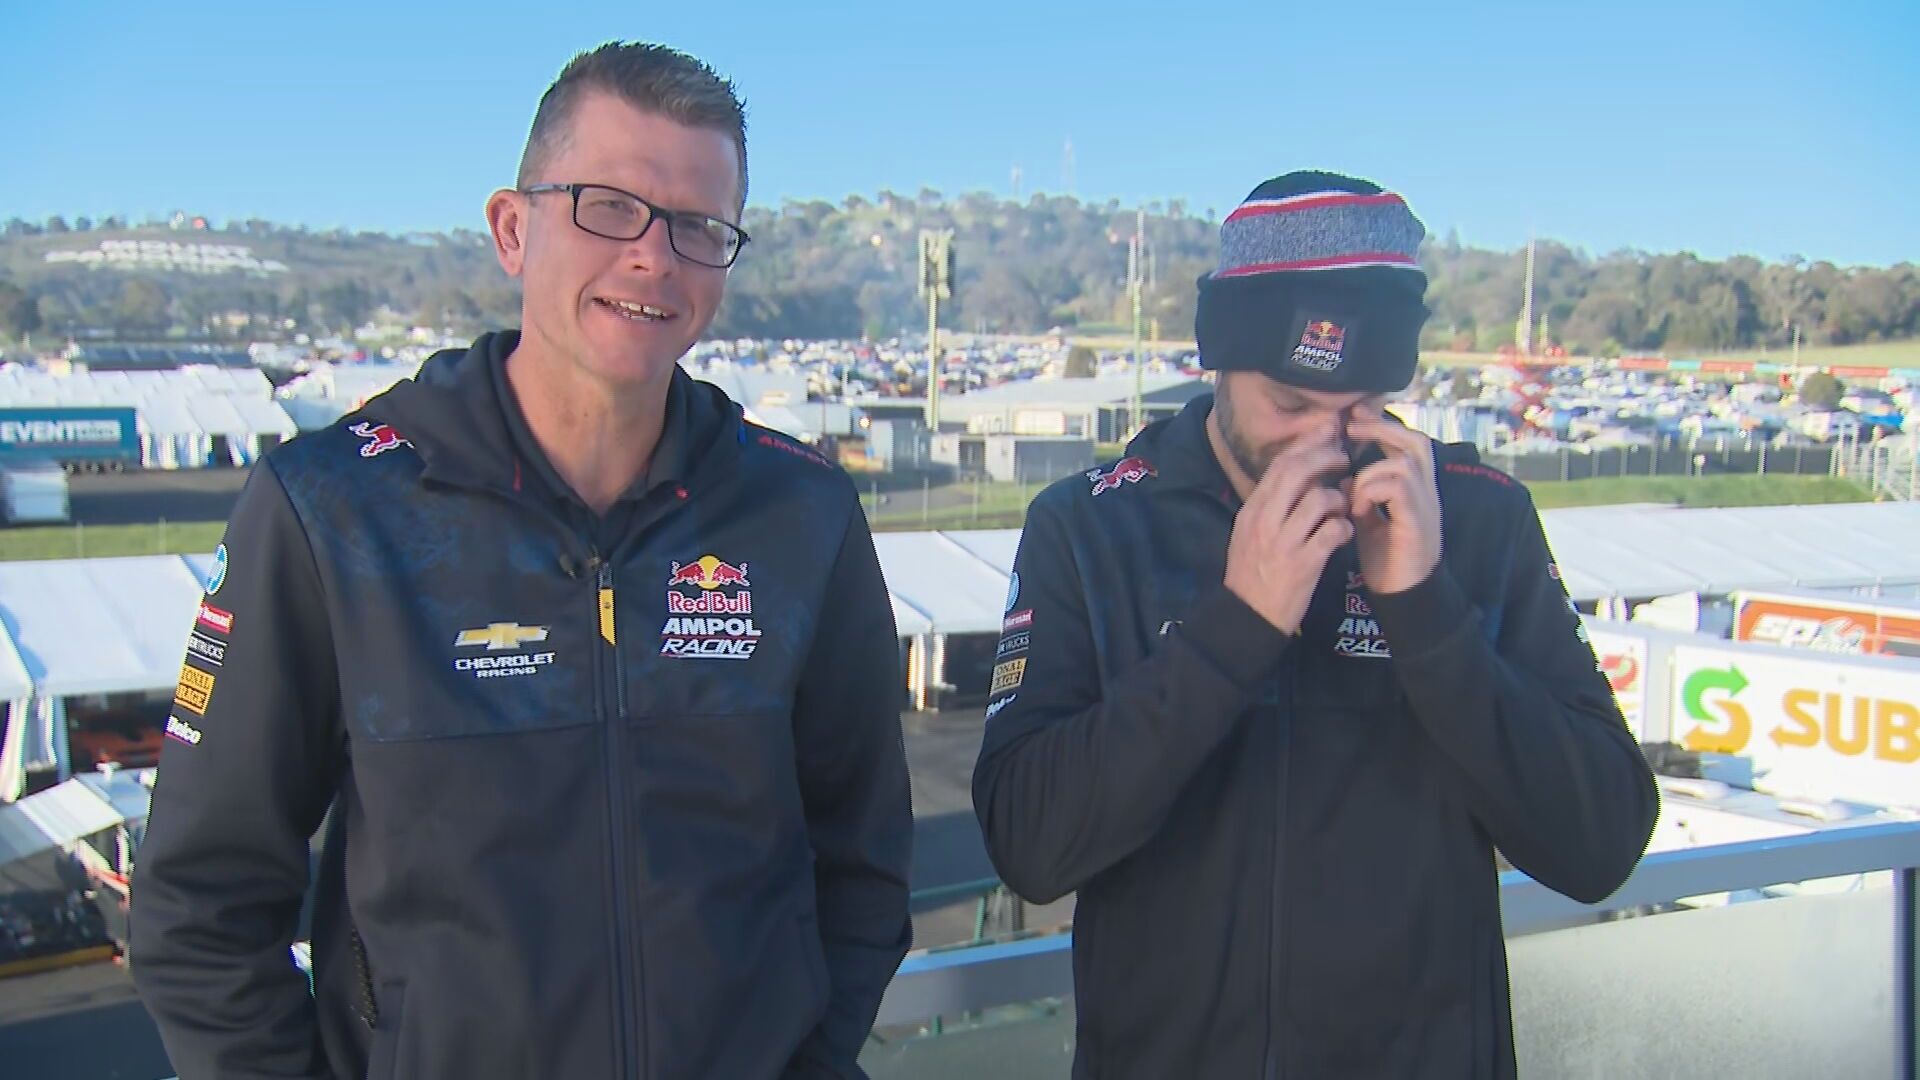 Shane van Gisbergen had to bail out of an appearance on the Today show to vomit after celebrating their win in the Bathurst 1000, leaving teammate Garth Tander to carry on alone.